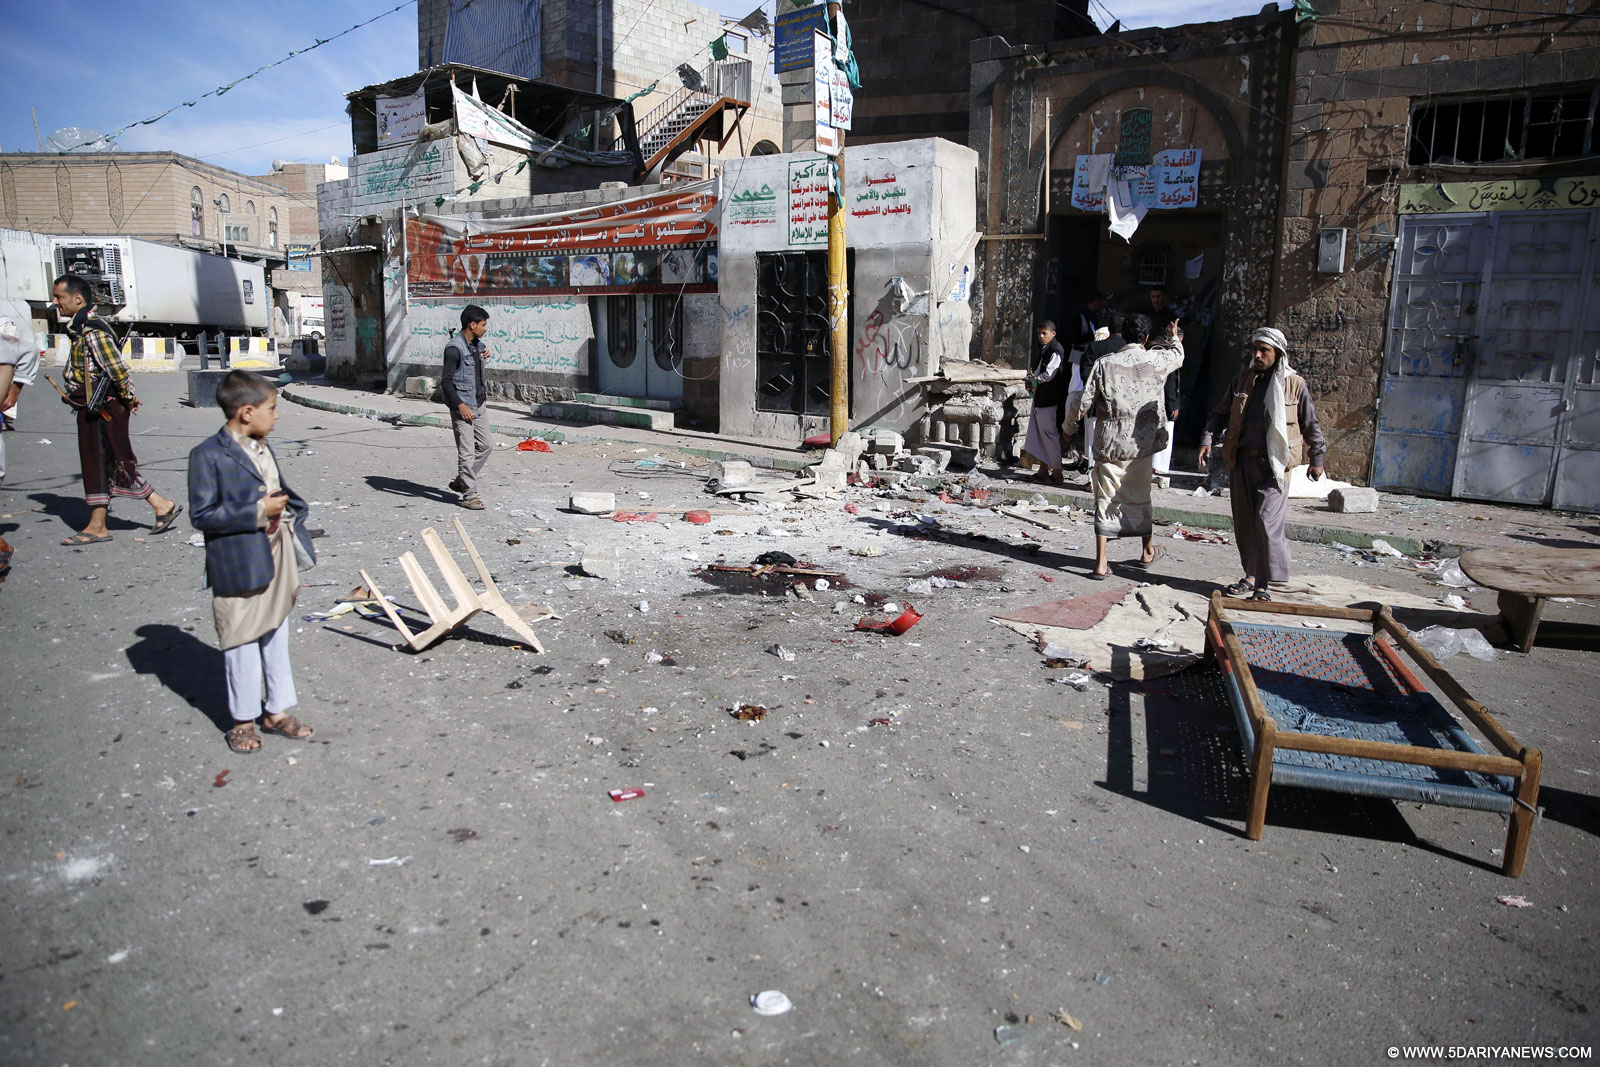  People gather around the mosque hit by suicide bombing attack in Sanaa, Yemen, on Sept. 24, 2015. Two suicide bombings rocked a mosque during Eid al-Adha prayers in Sanaa on Wednesday morning, killing about 30 people and injuring scores of others, a security official told Xinhua. 